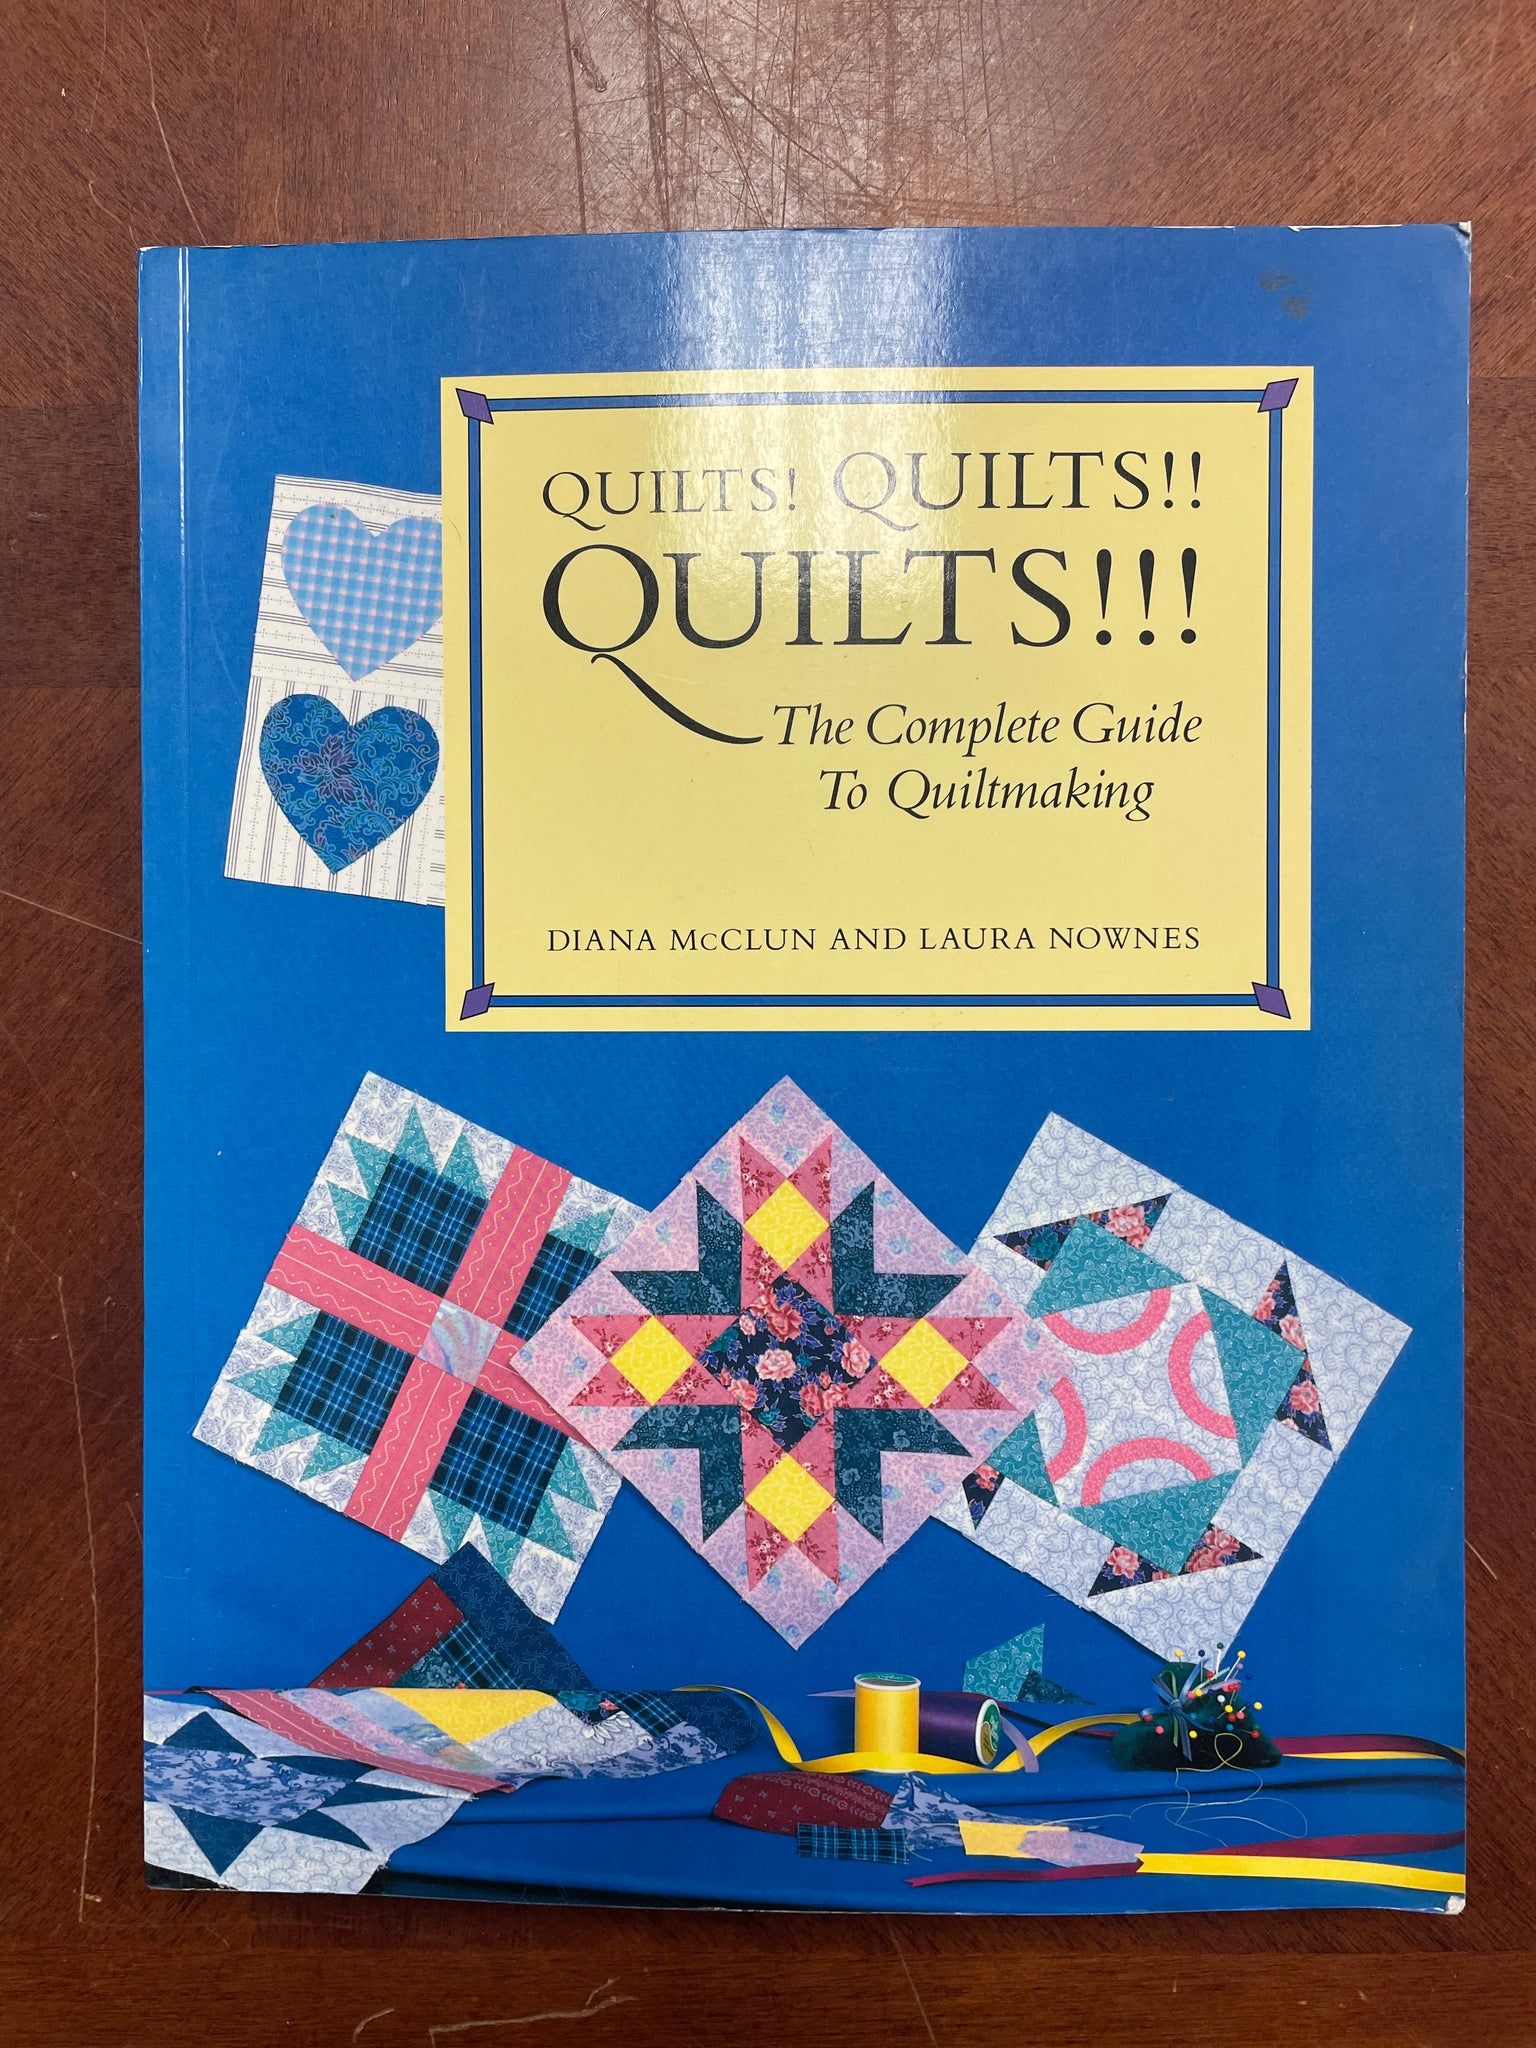 1988 Quilting Book - "Quilts! Quilts! Quilts!"